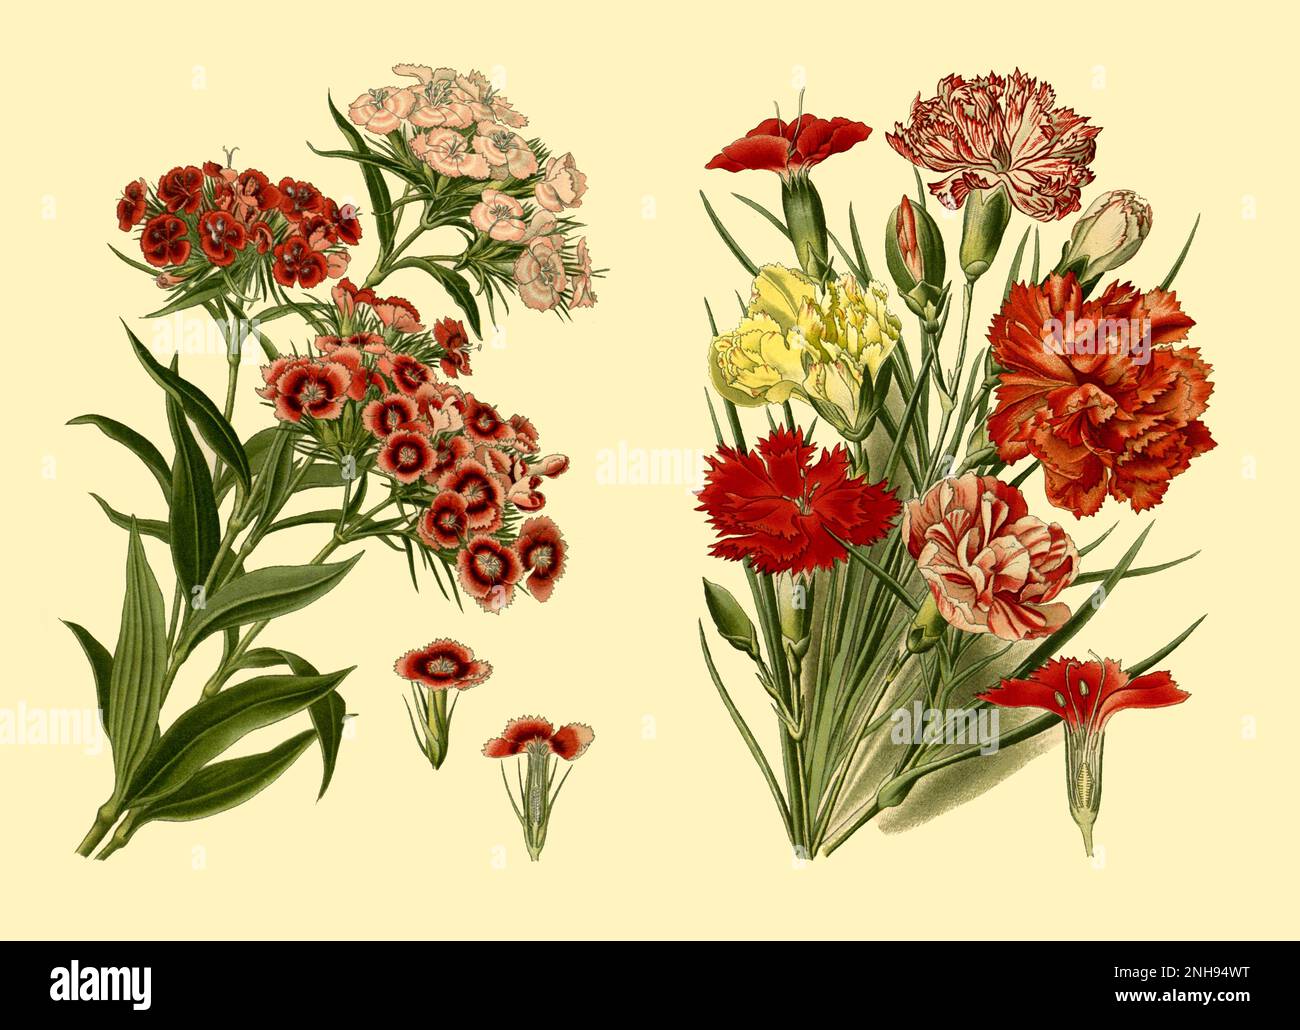 In 1716, English botanist Thomas Fairchild (c.1667-1729) created the world's first man-made hybrid plant, Dianthus Caryophyllus barbatus, known as Fairchild's Mule. It was a cross between a Sweet William (Dianthus barbatus) (left) and a pink carnation (Dianthus caryophyllus) (right). Composite image. Stock Photo